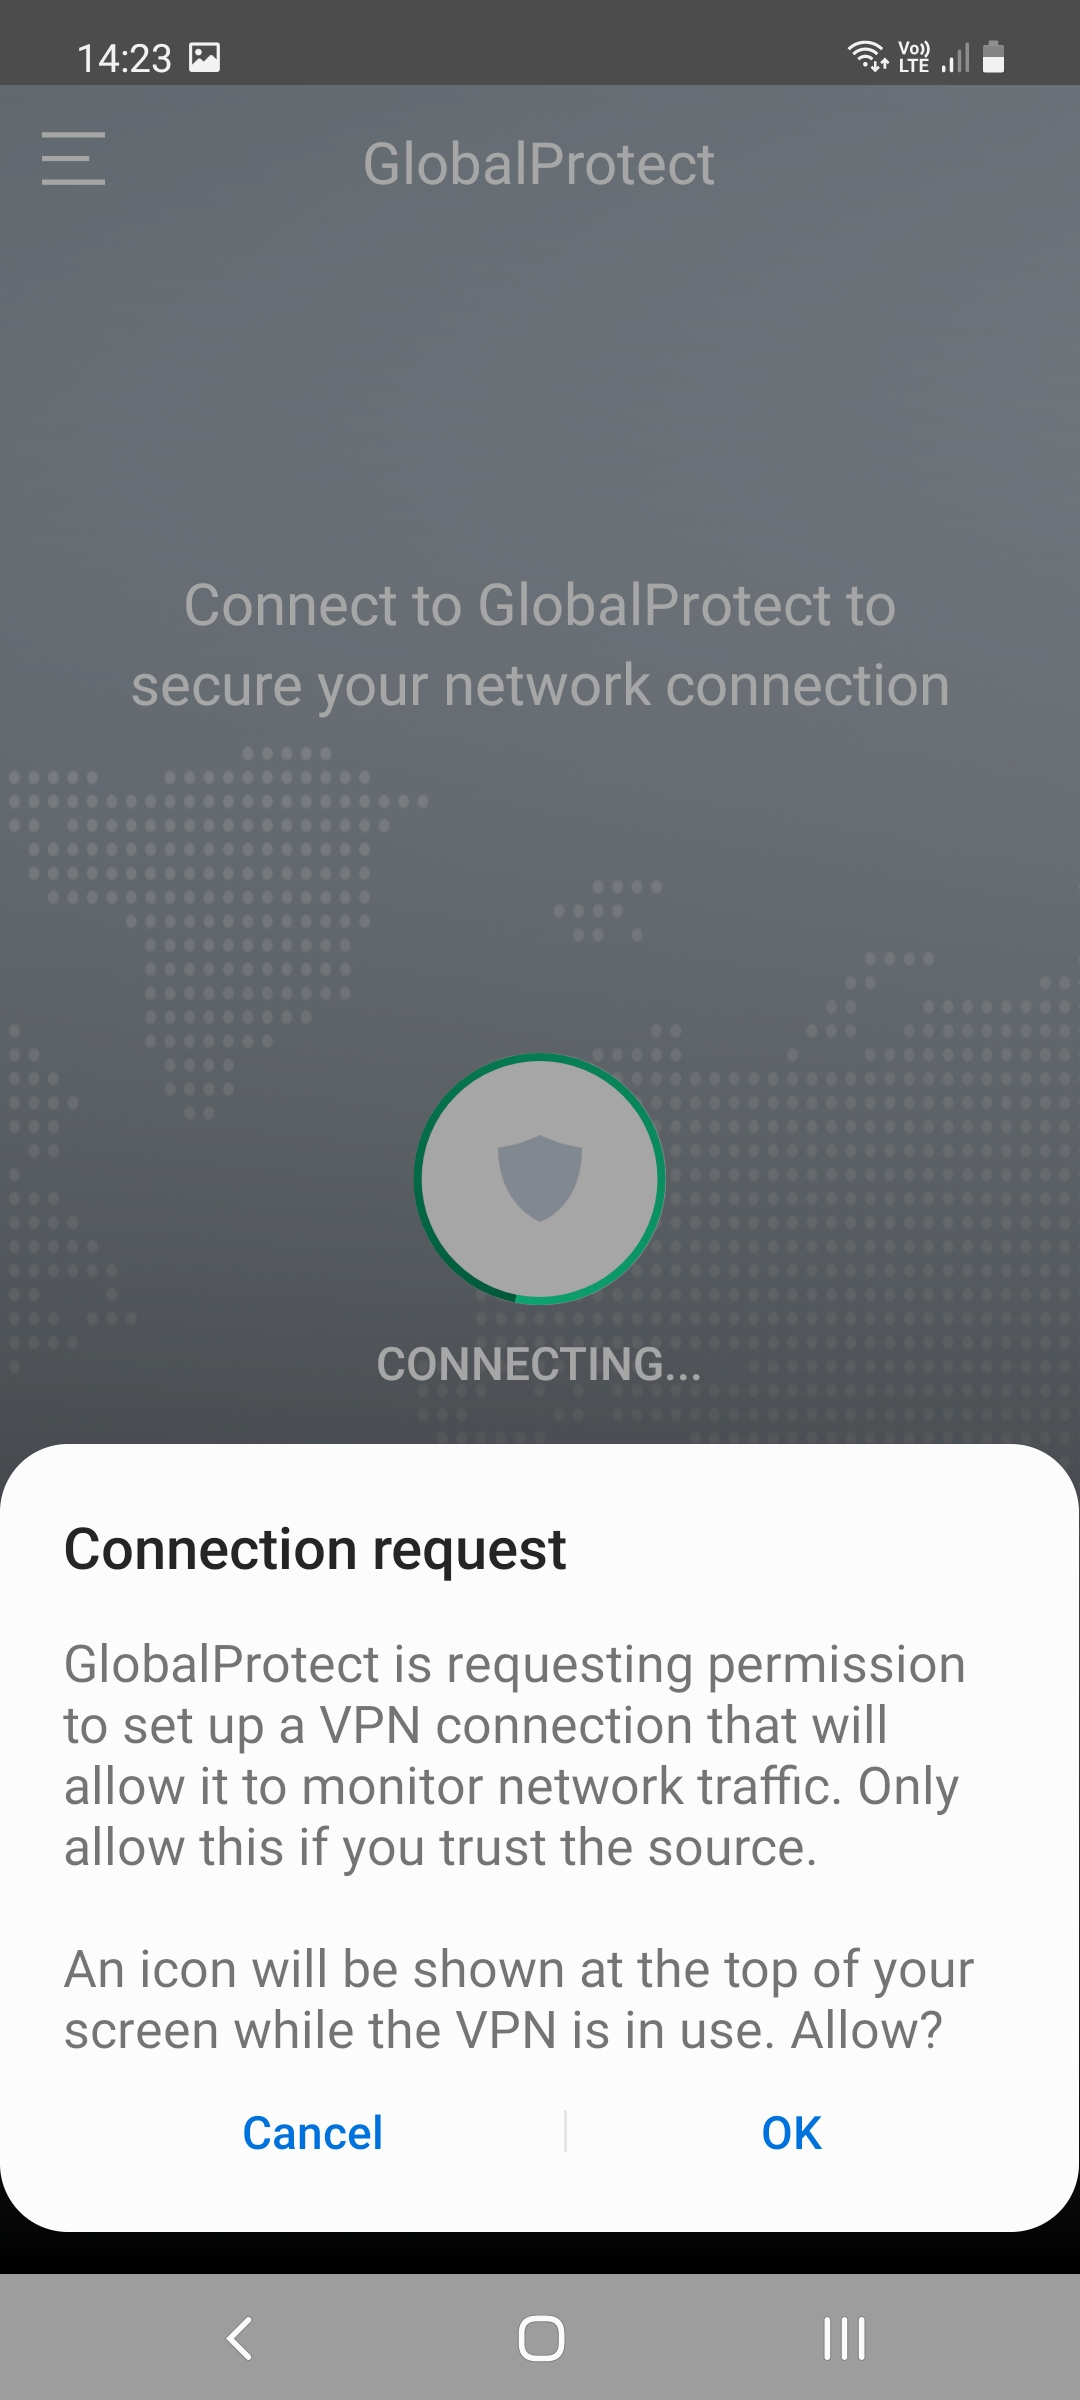 Press OK when you see the connection request popup